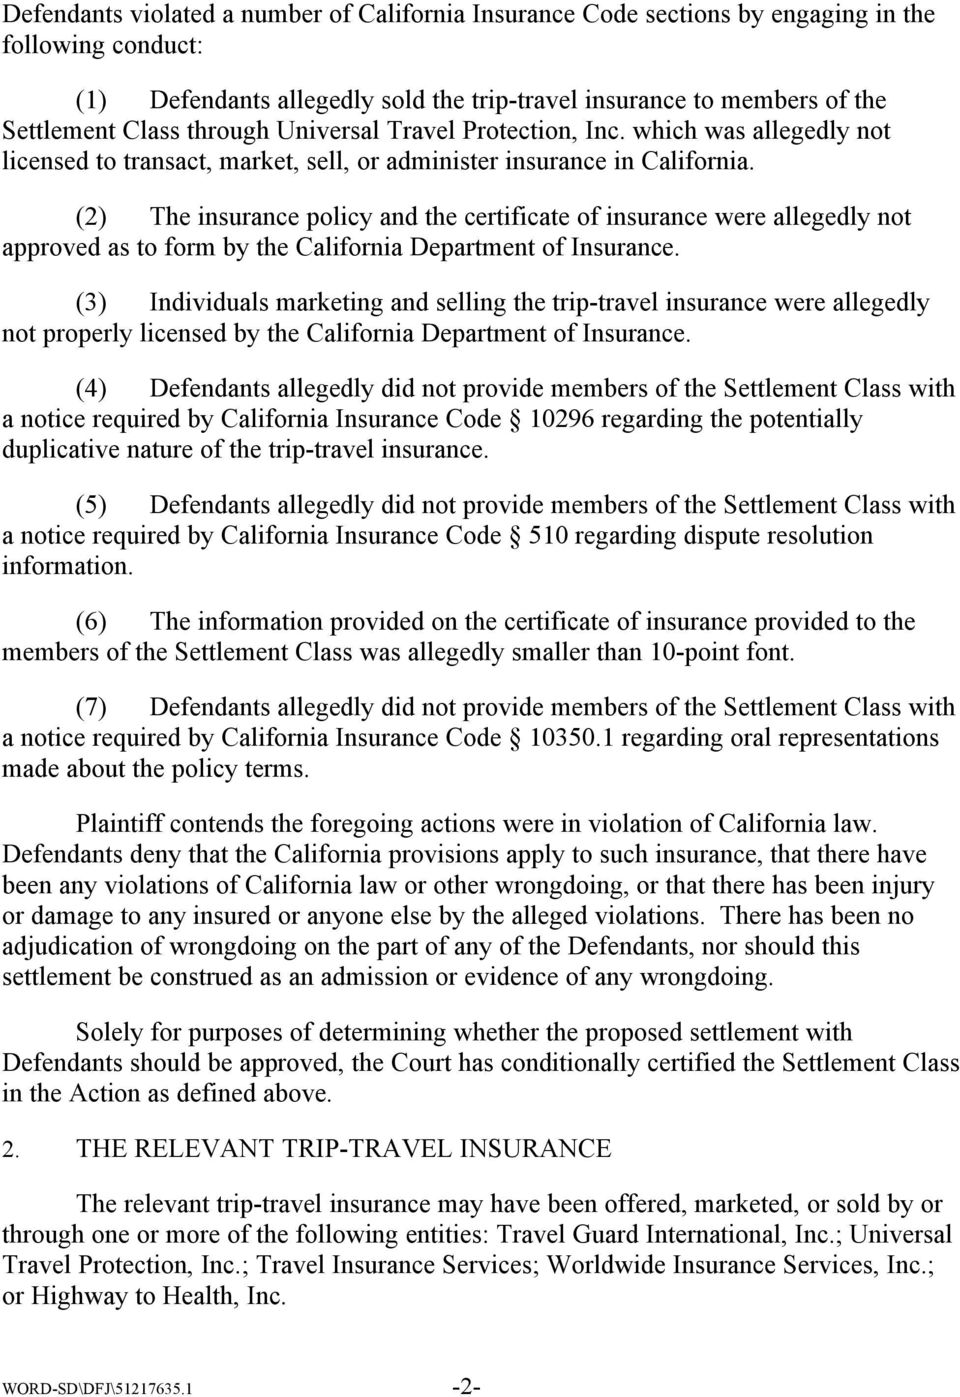 (2 The insurance policy and the certificate of insurance were allegedly not approved as to form by the California Department of Insurance.